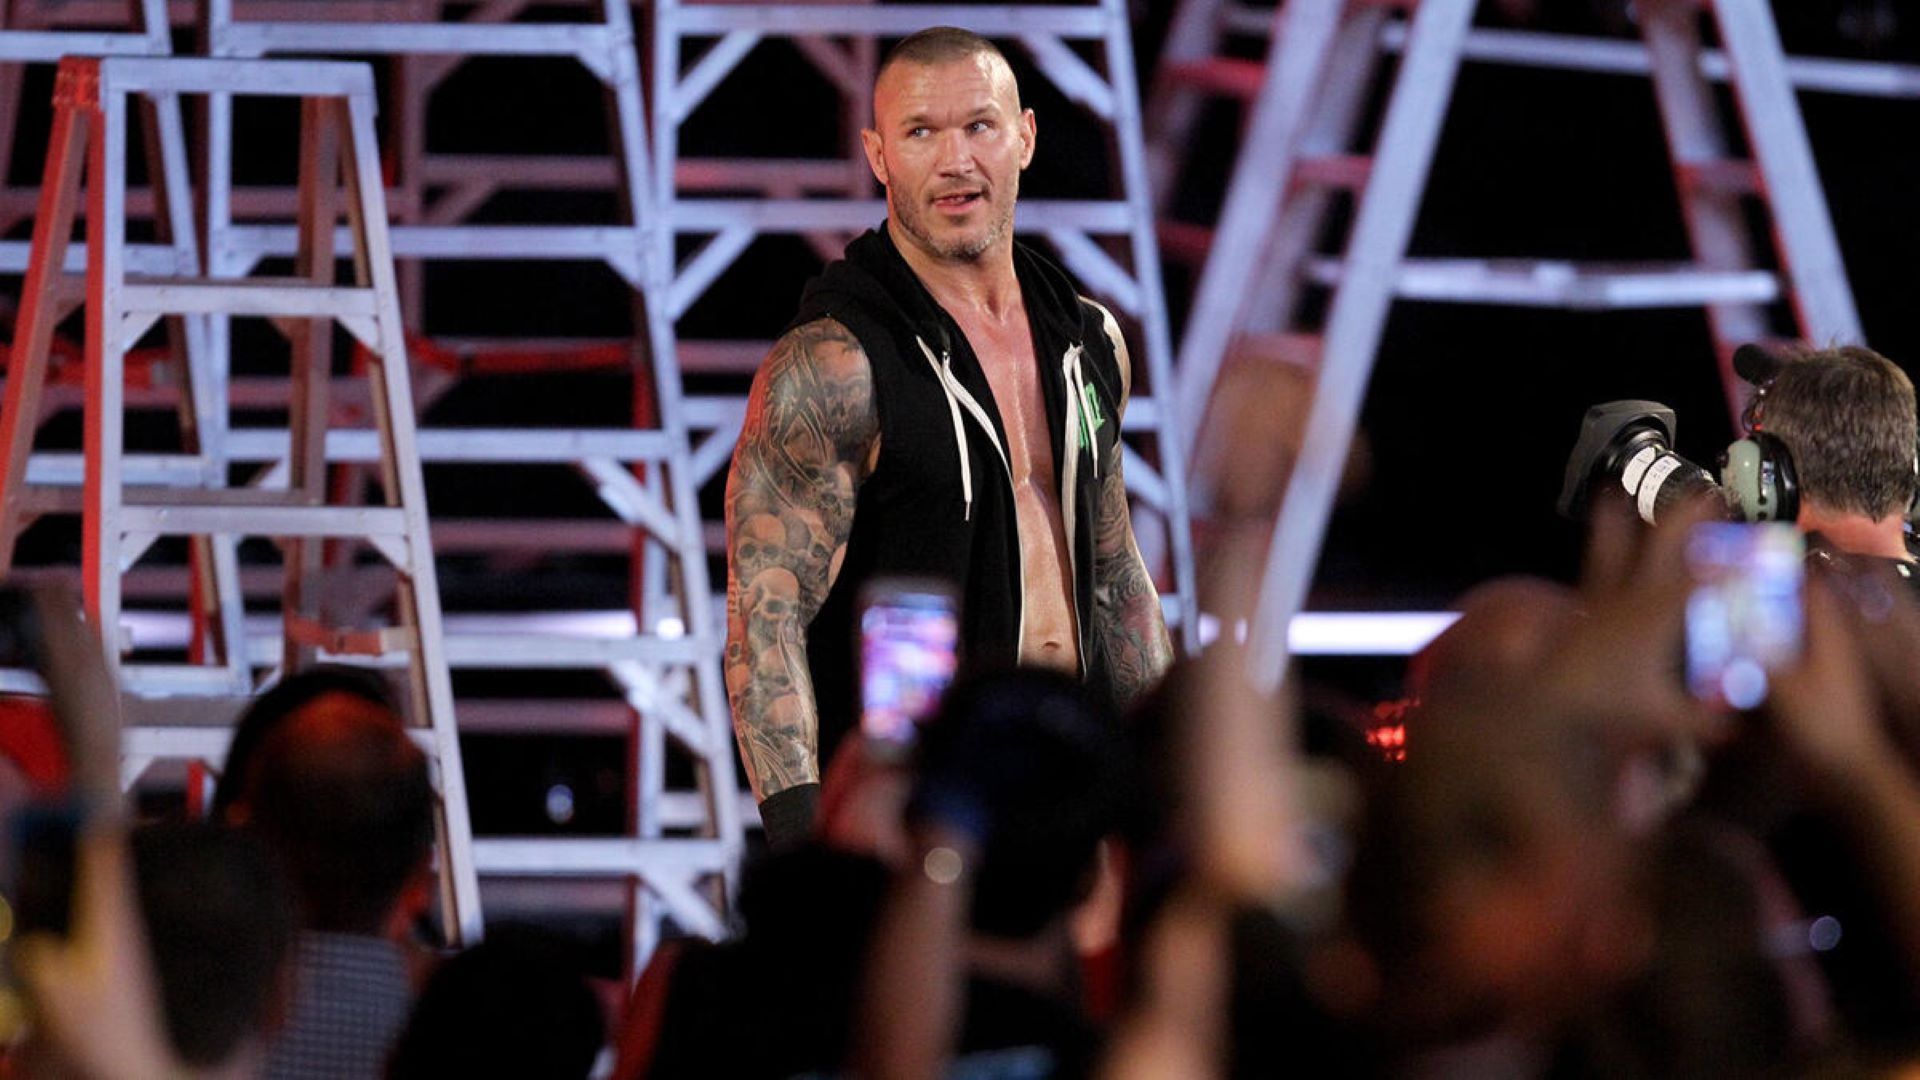 The Viper has won numerous titles and competed in many specialty matches.